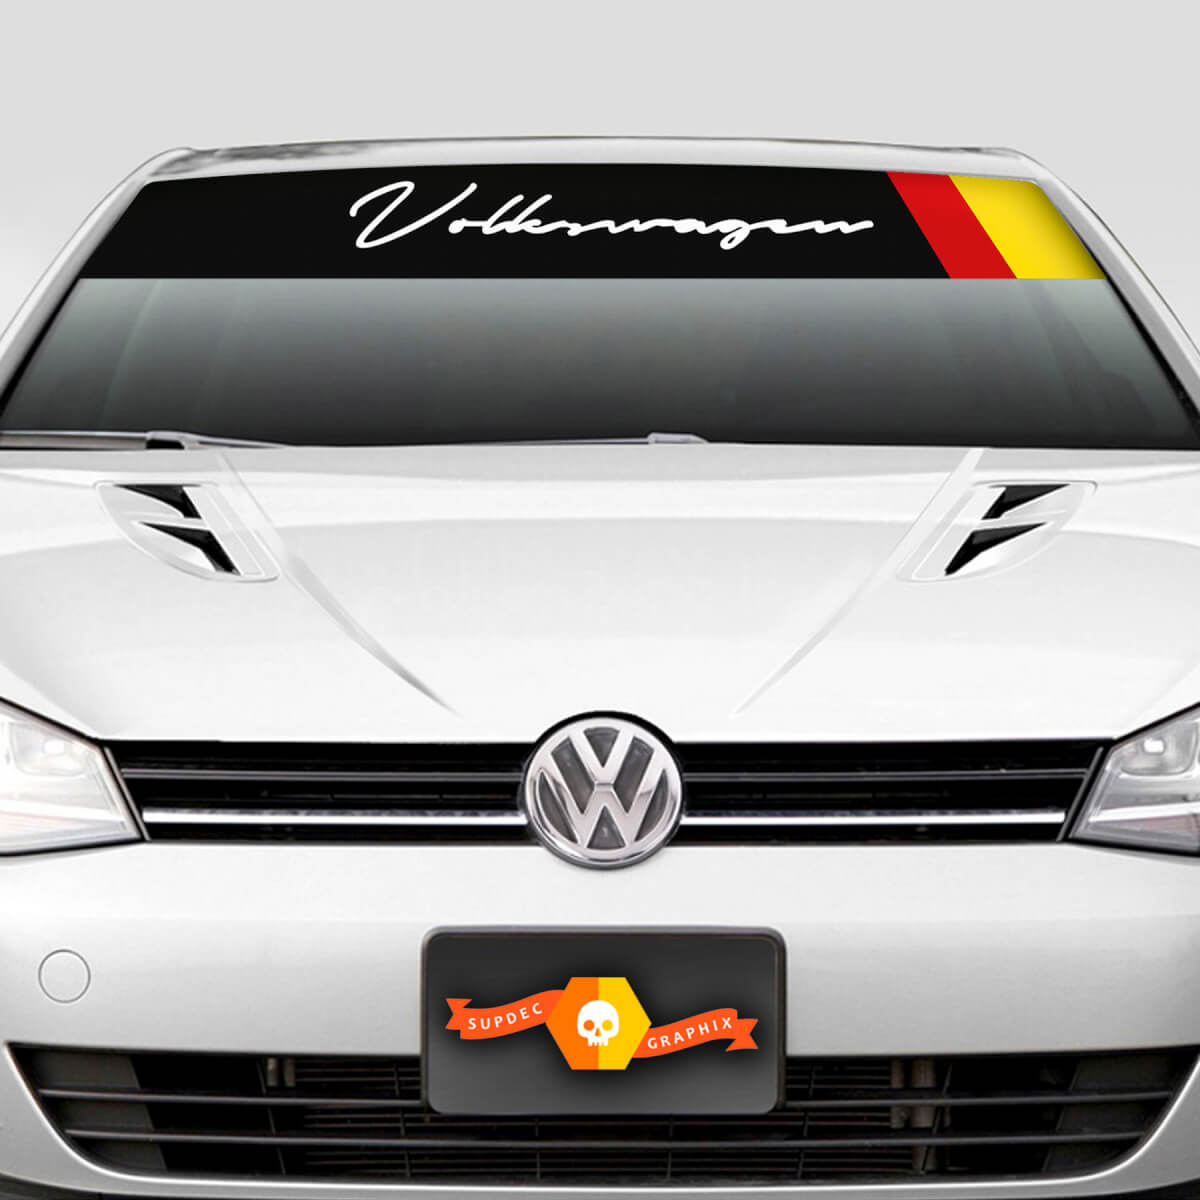 https://de.supdec.com/images/12273_1_windshield_sunstrip_sun_strip__any_year_stickers_exclusive_design_decal__for_volkswagen_vw_golf_graphics.jpg